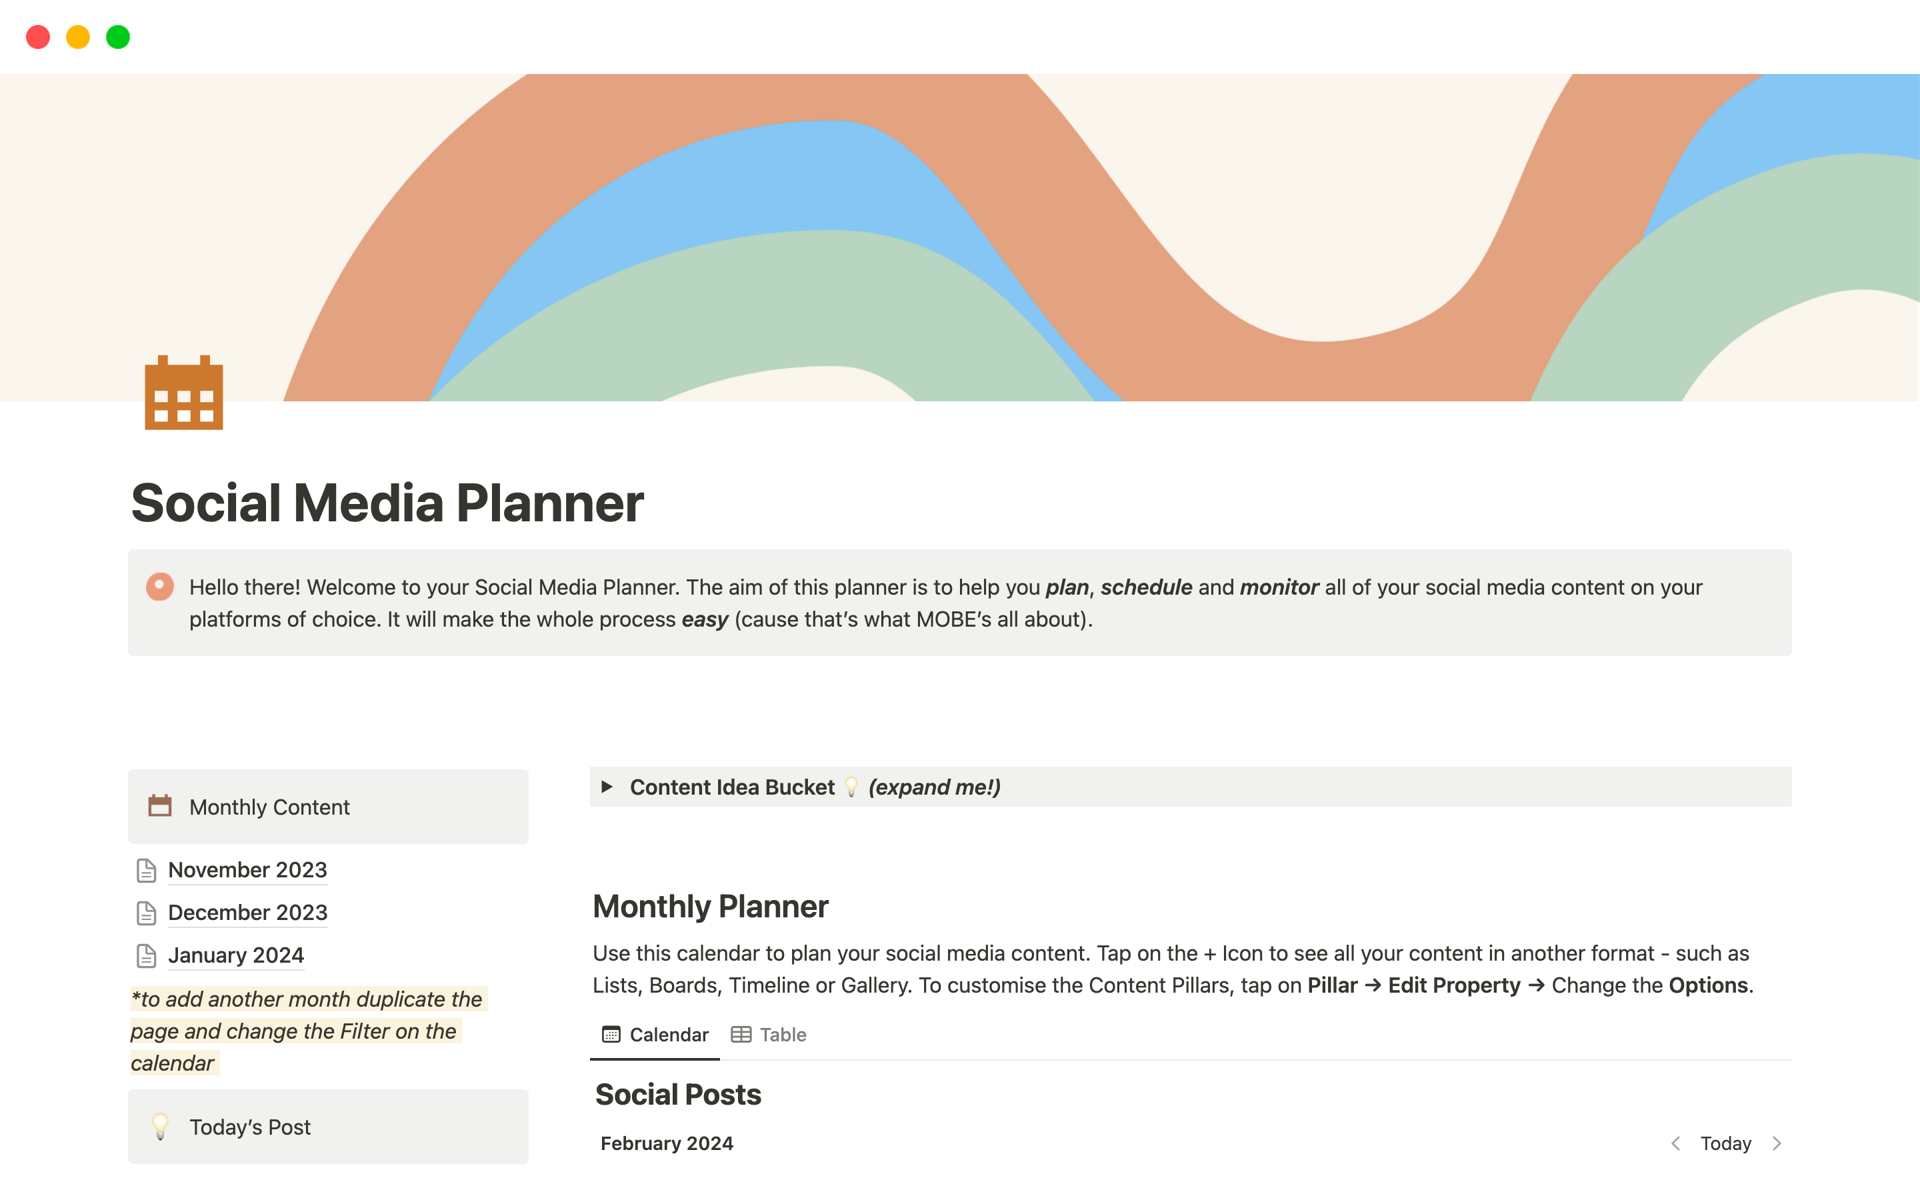 Social Media Planner Calendar helping your to organise all your content, social media channels and plan your strategy